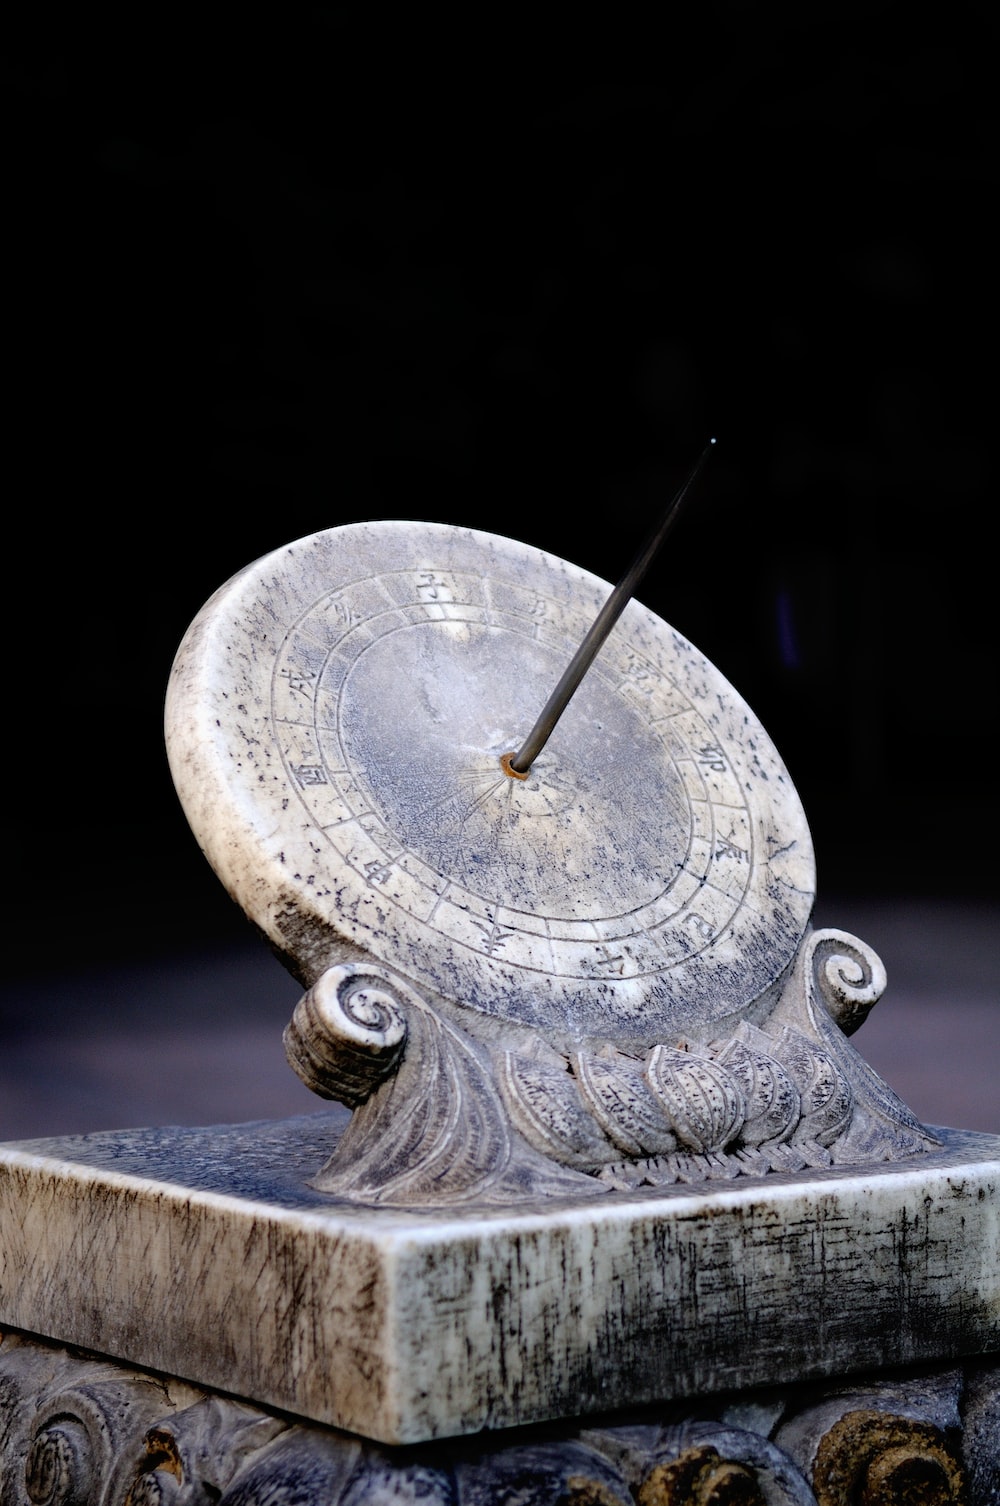 Sundial Picture. Download Free Image